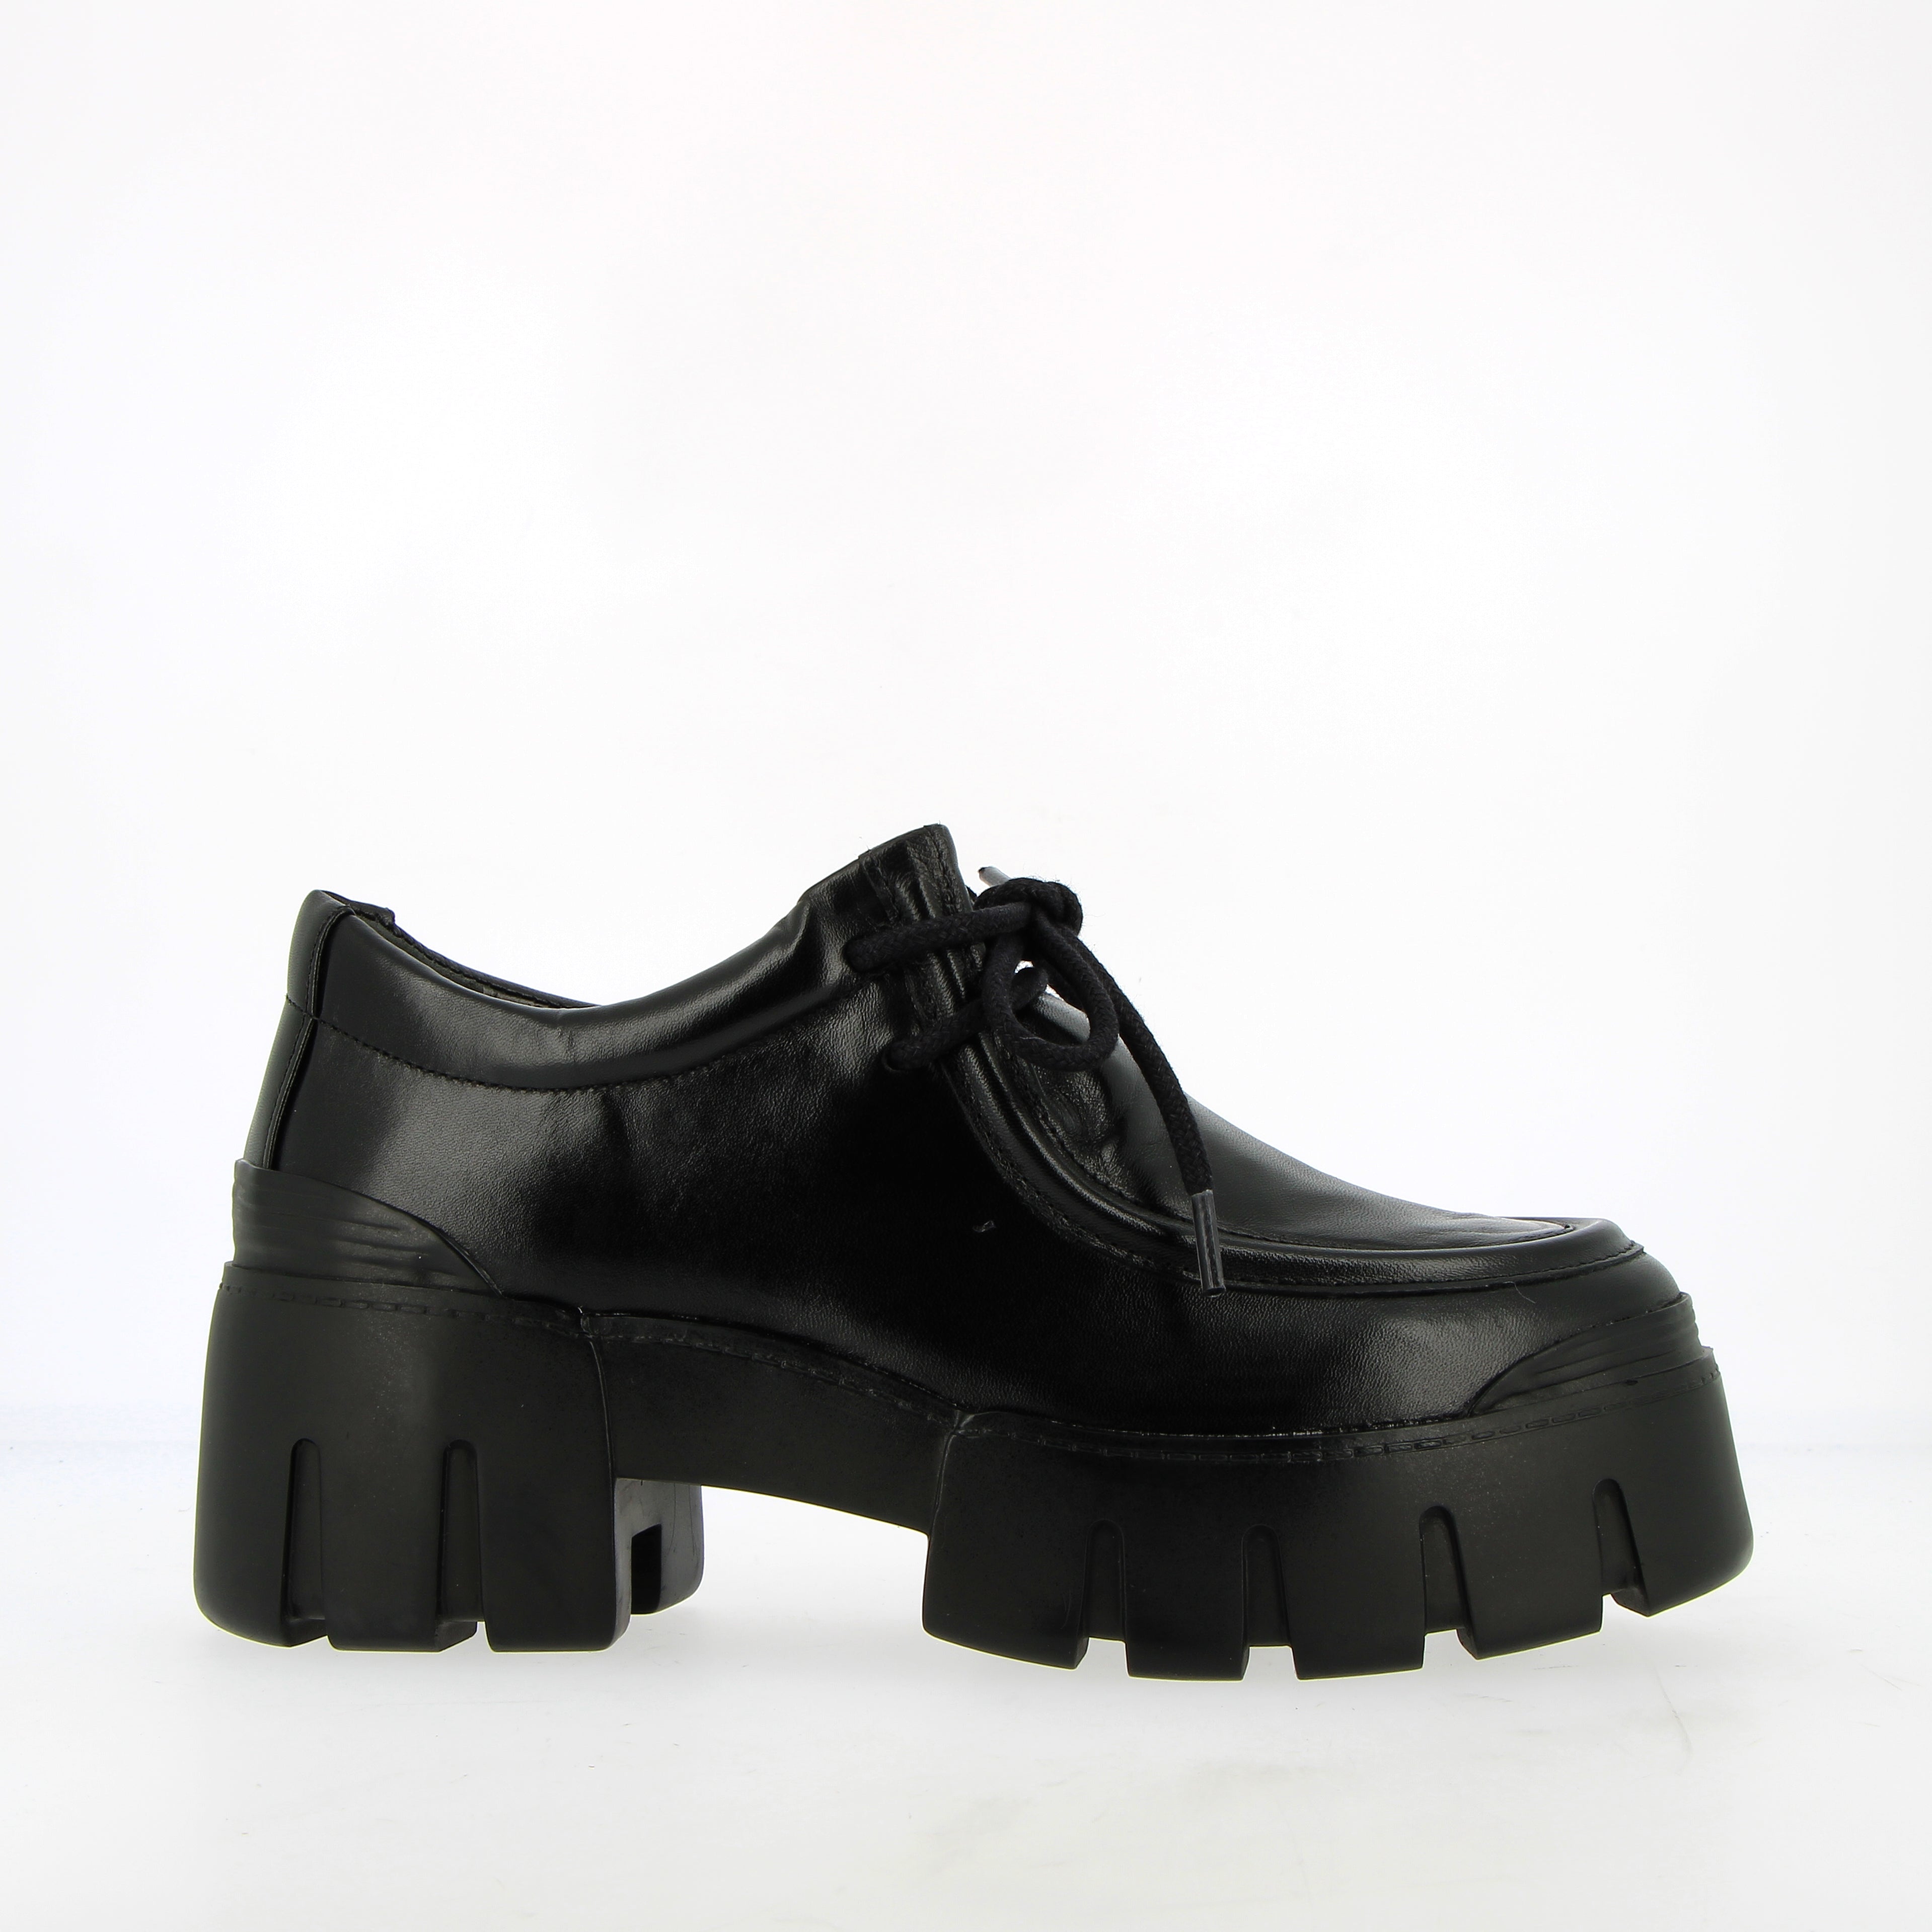 Lace-up moccasin in black leather with rubber sole